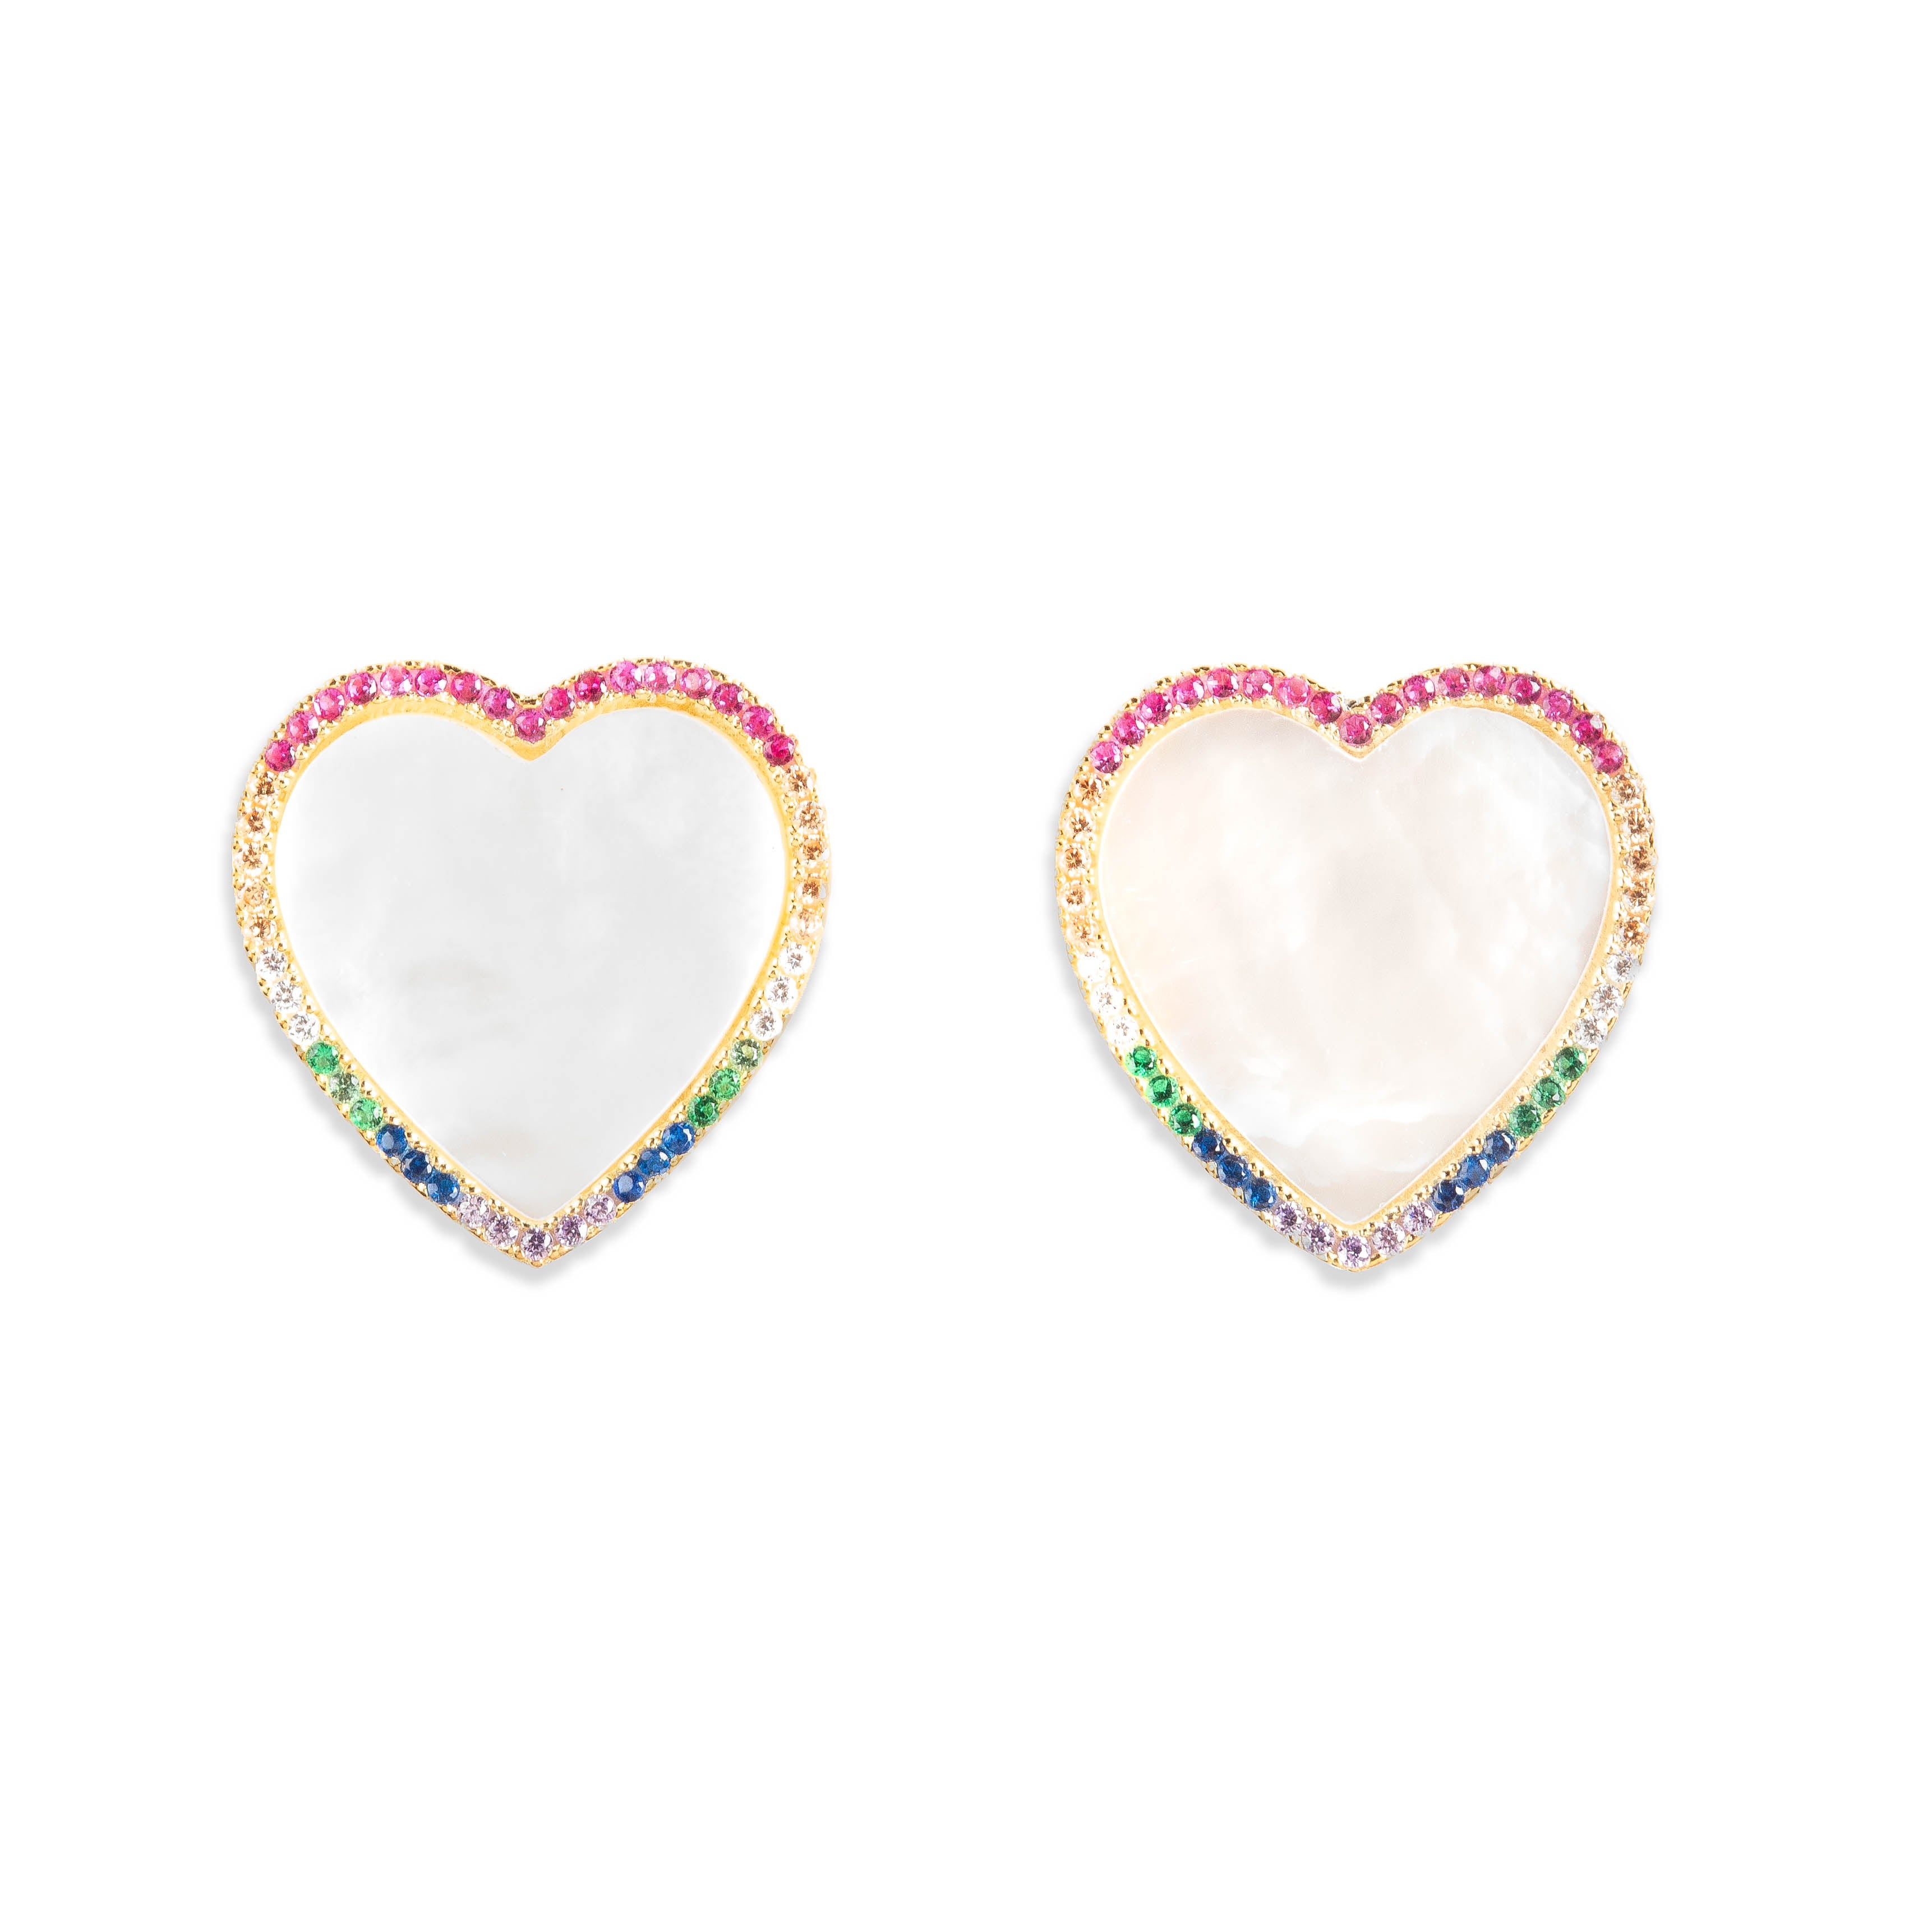 HEART EARRINGS WITH MOTHER OF PEARL AND MULTICOLOR CRYSTALS SET IN 925 SILVER GOLD PLATED